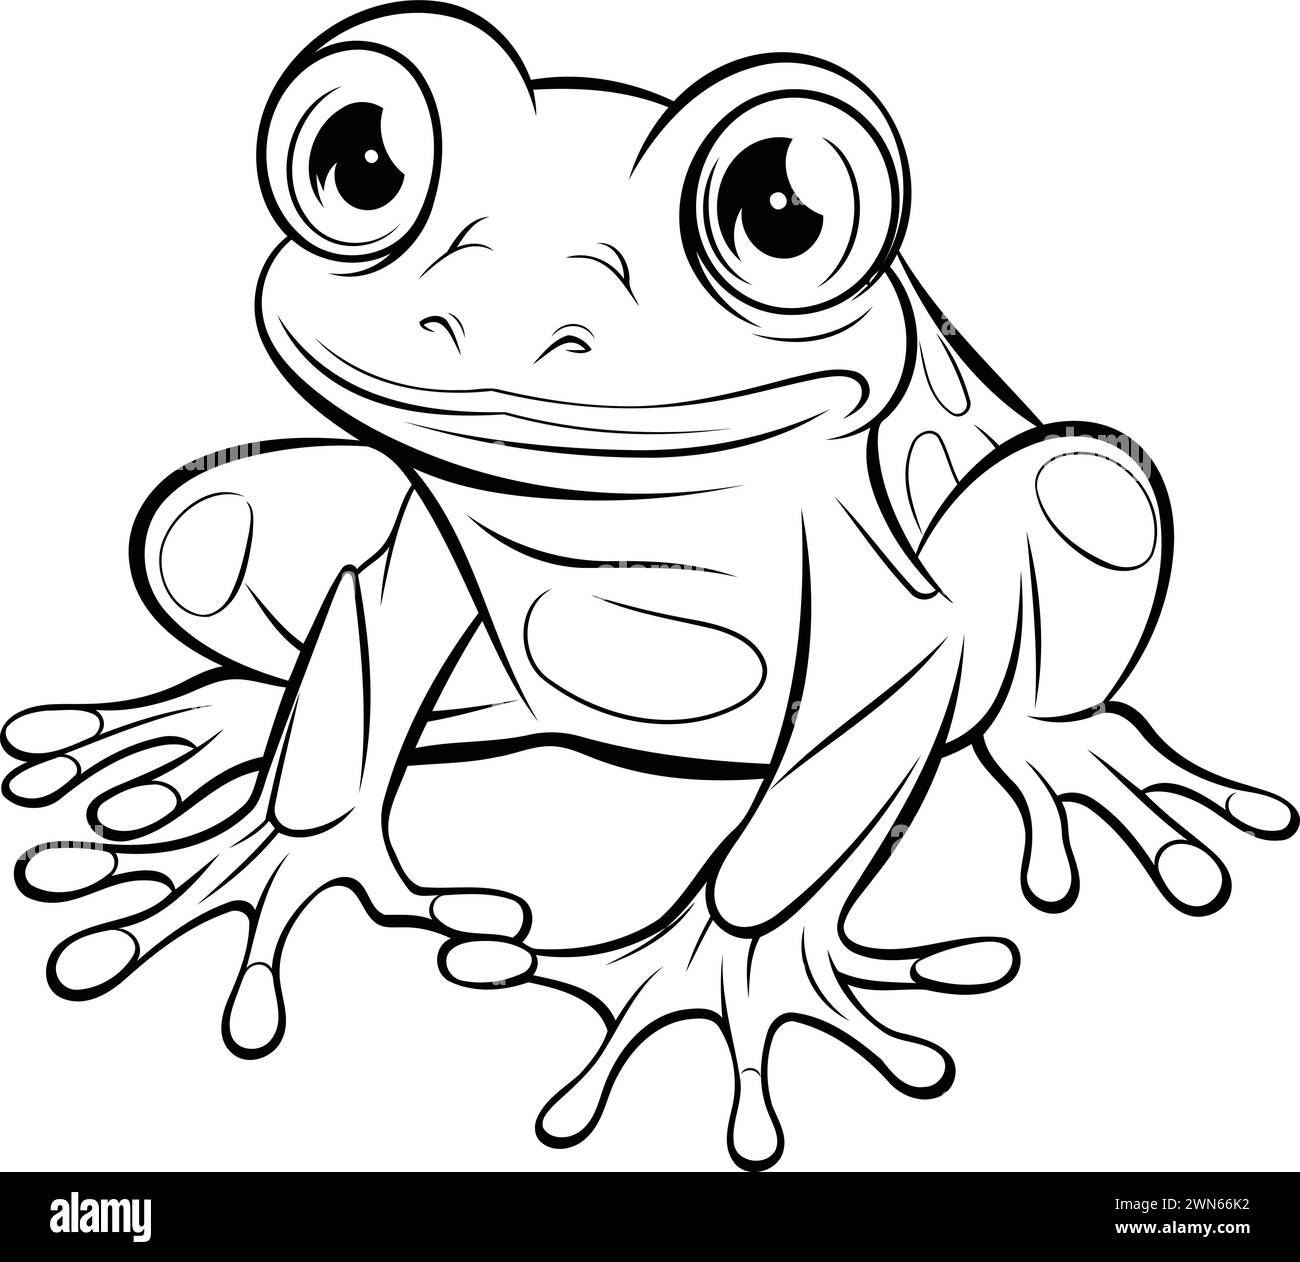 Frog - Coloring book for children and adults. Vector illustration Stock Vector